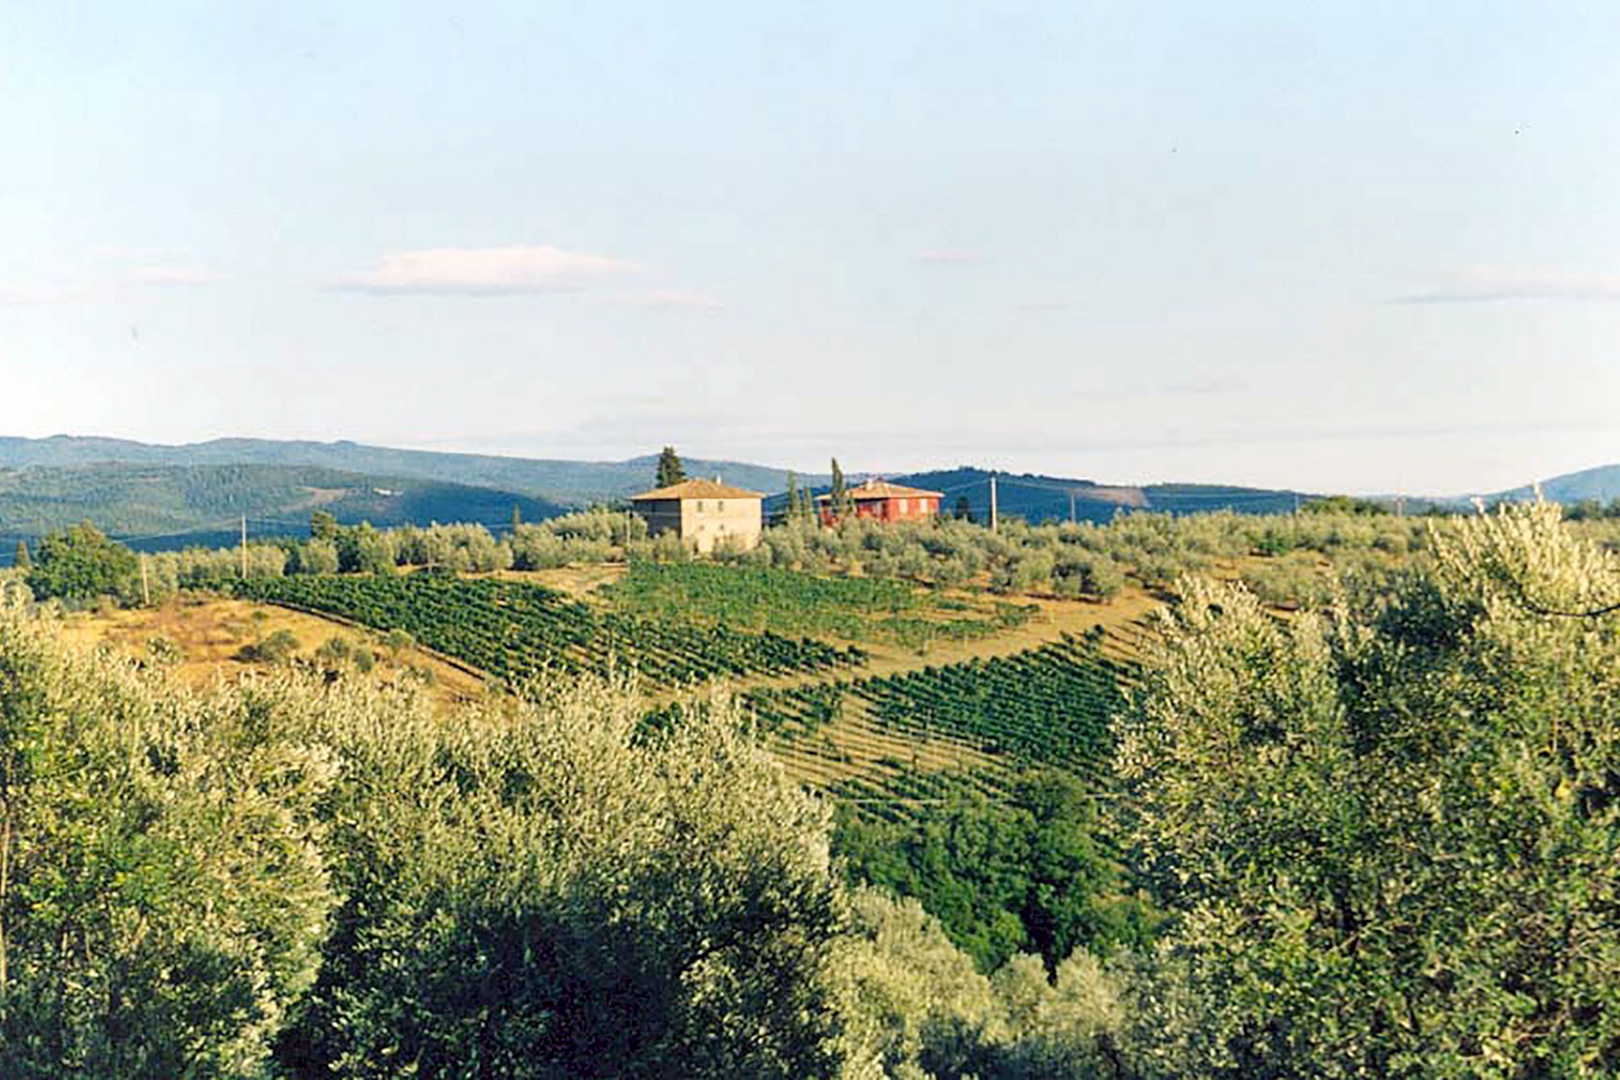 View of Casa Rossa, the original farmhouse and Casa San Vito which was once the barn.